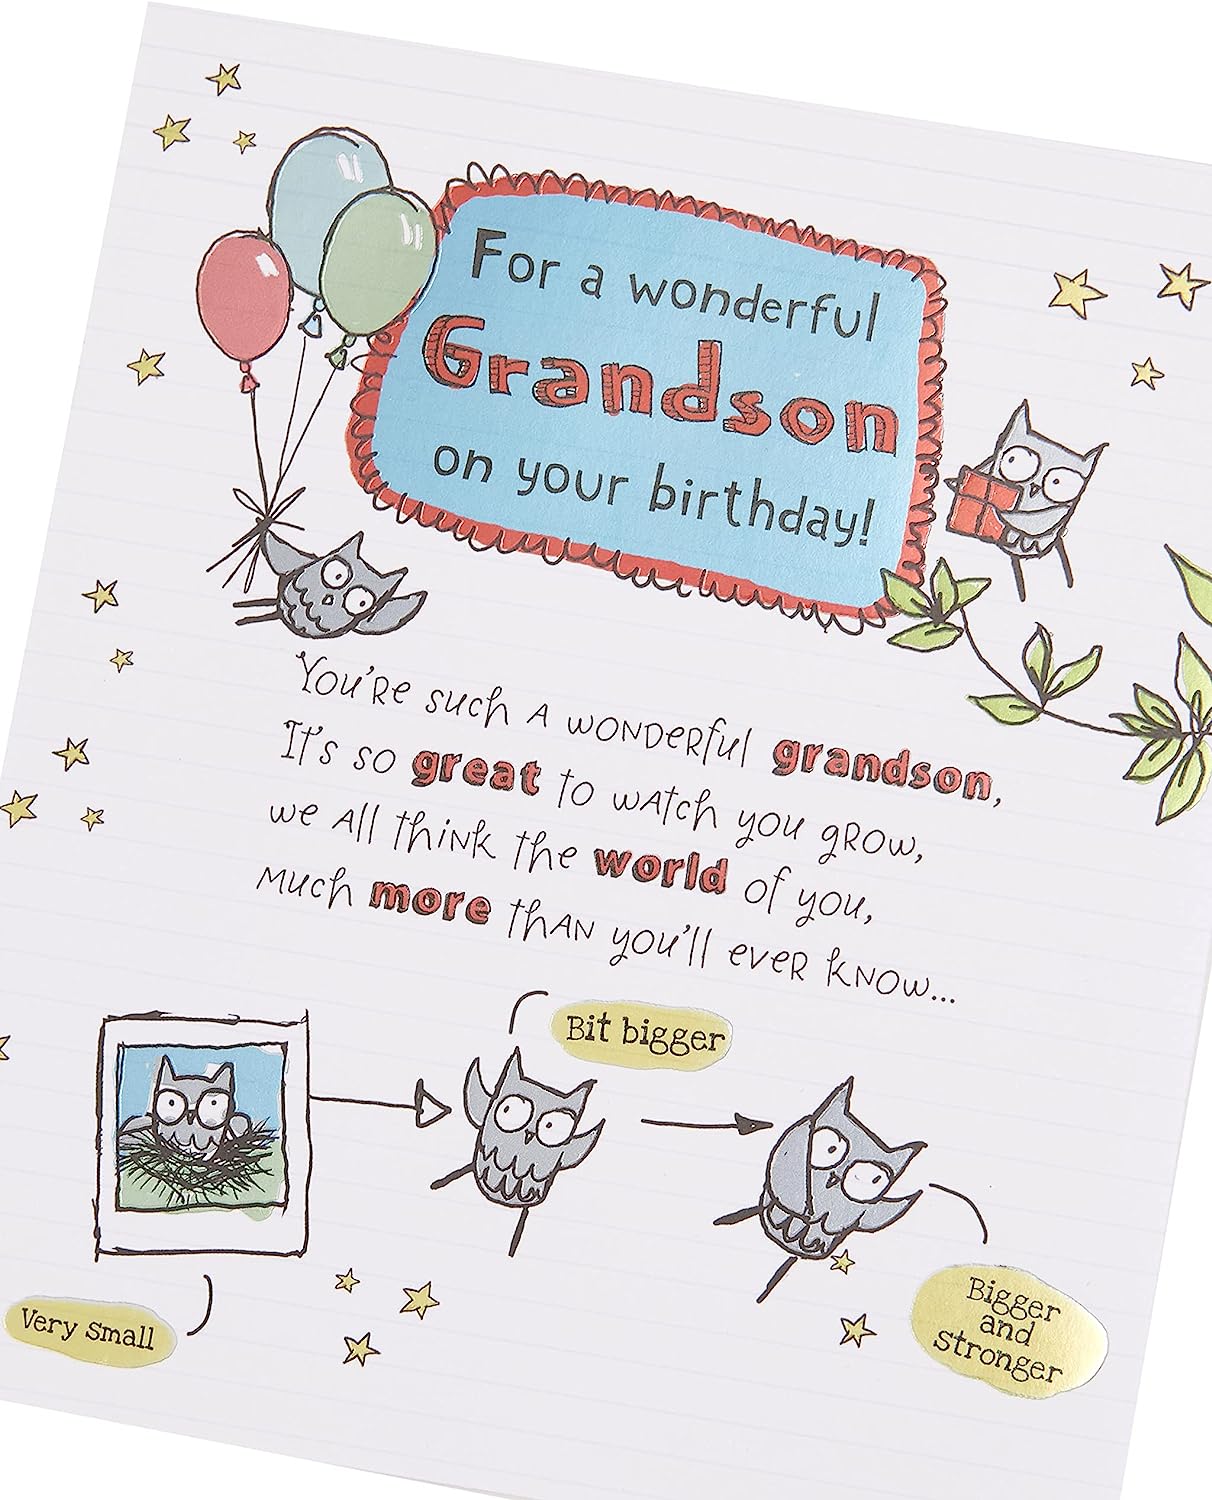 Cute Design with Owl Illustration and Sentimental Verse Grandson Birthday Card